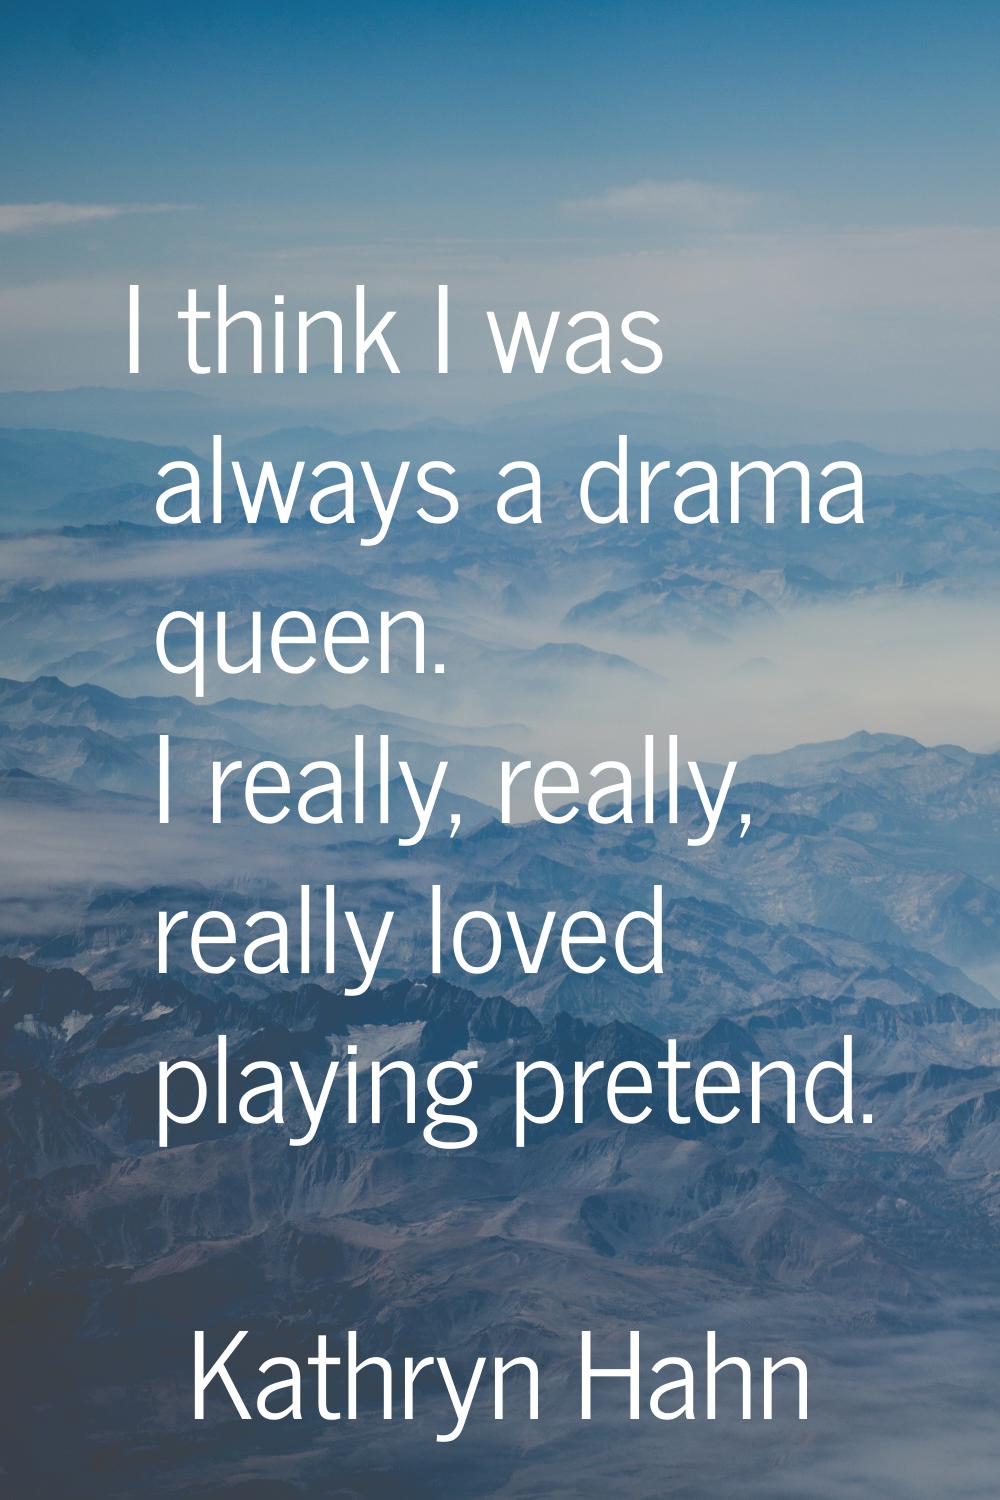 I think I was always a drama queen. I really, really, really loved playing pretend.